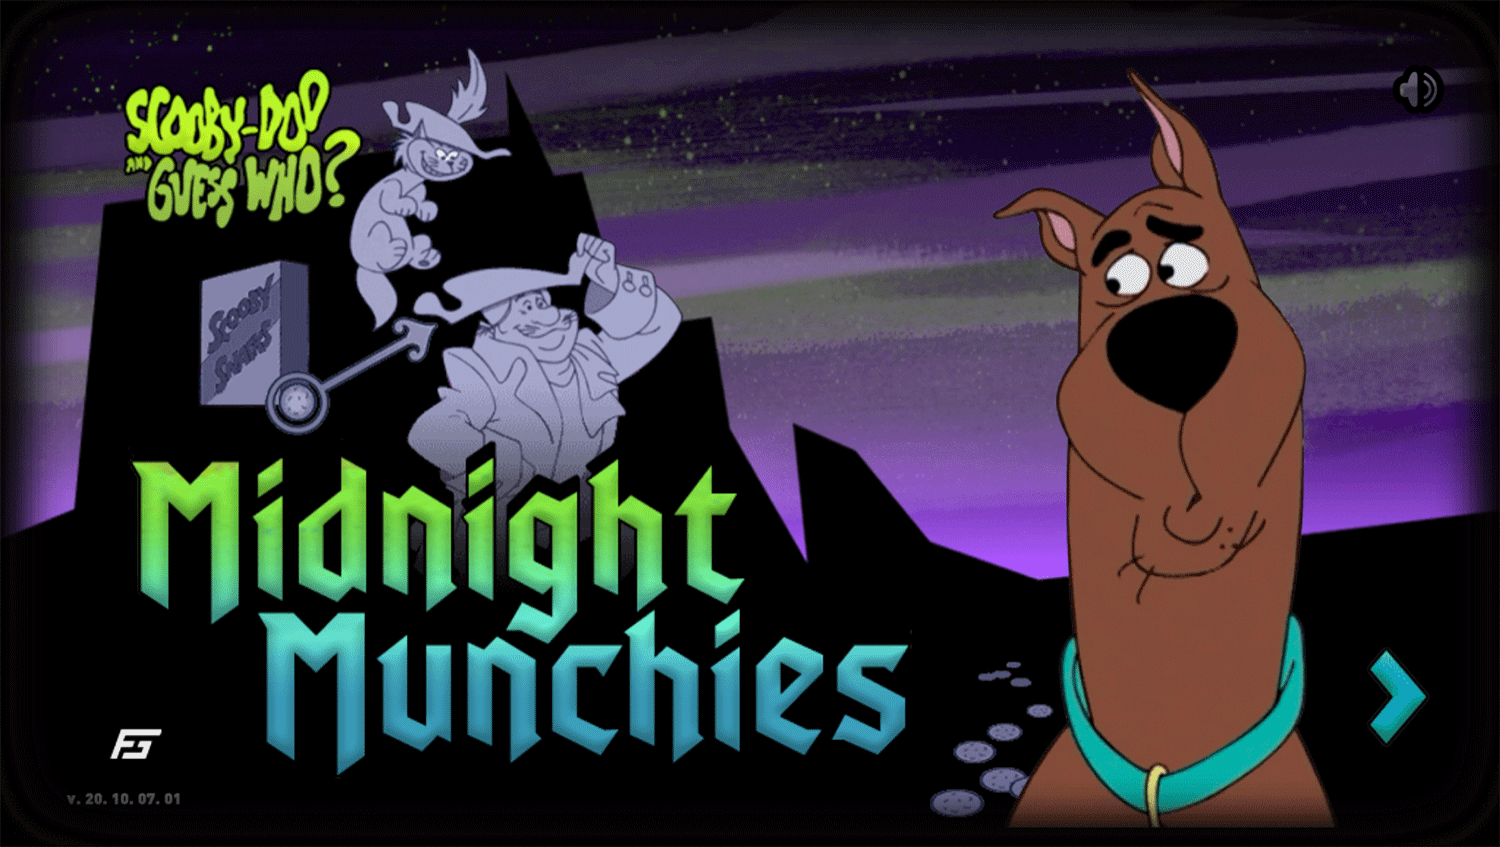 Scooby Doo and Guess Who Midnight Munchies.